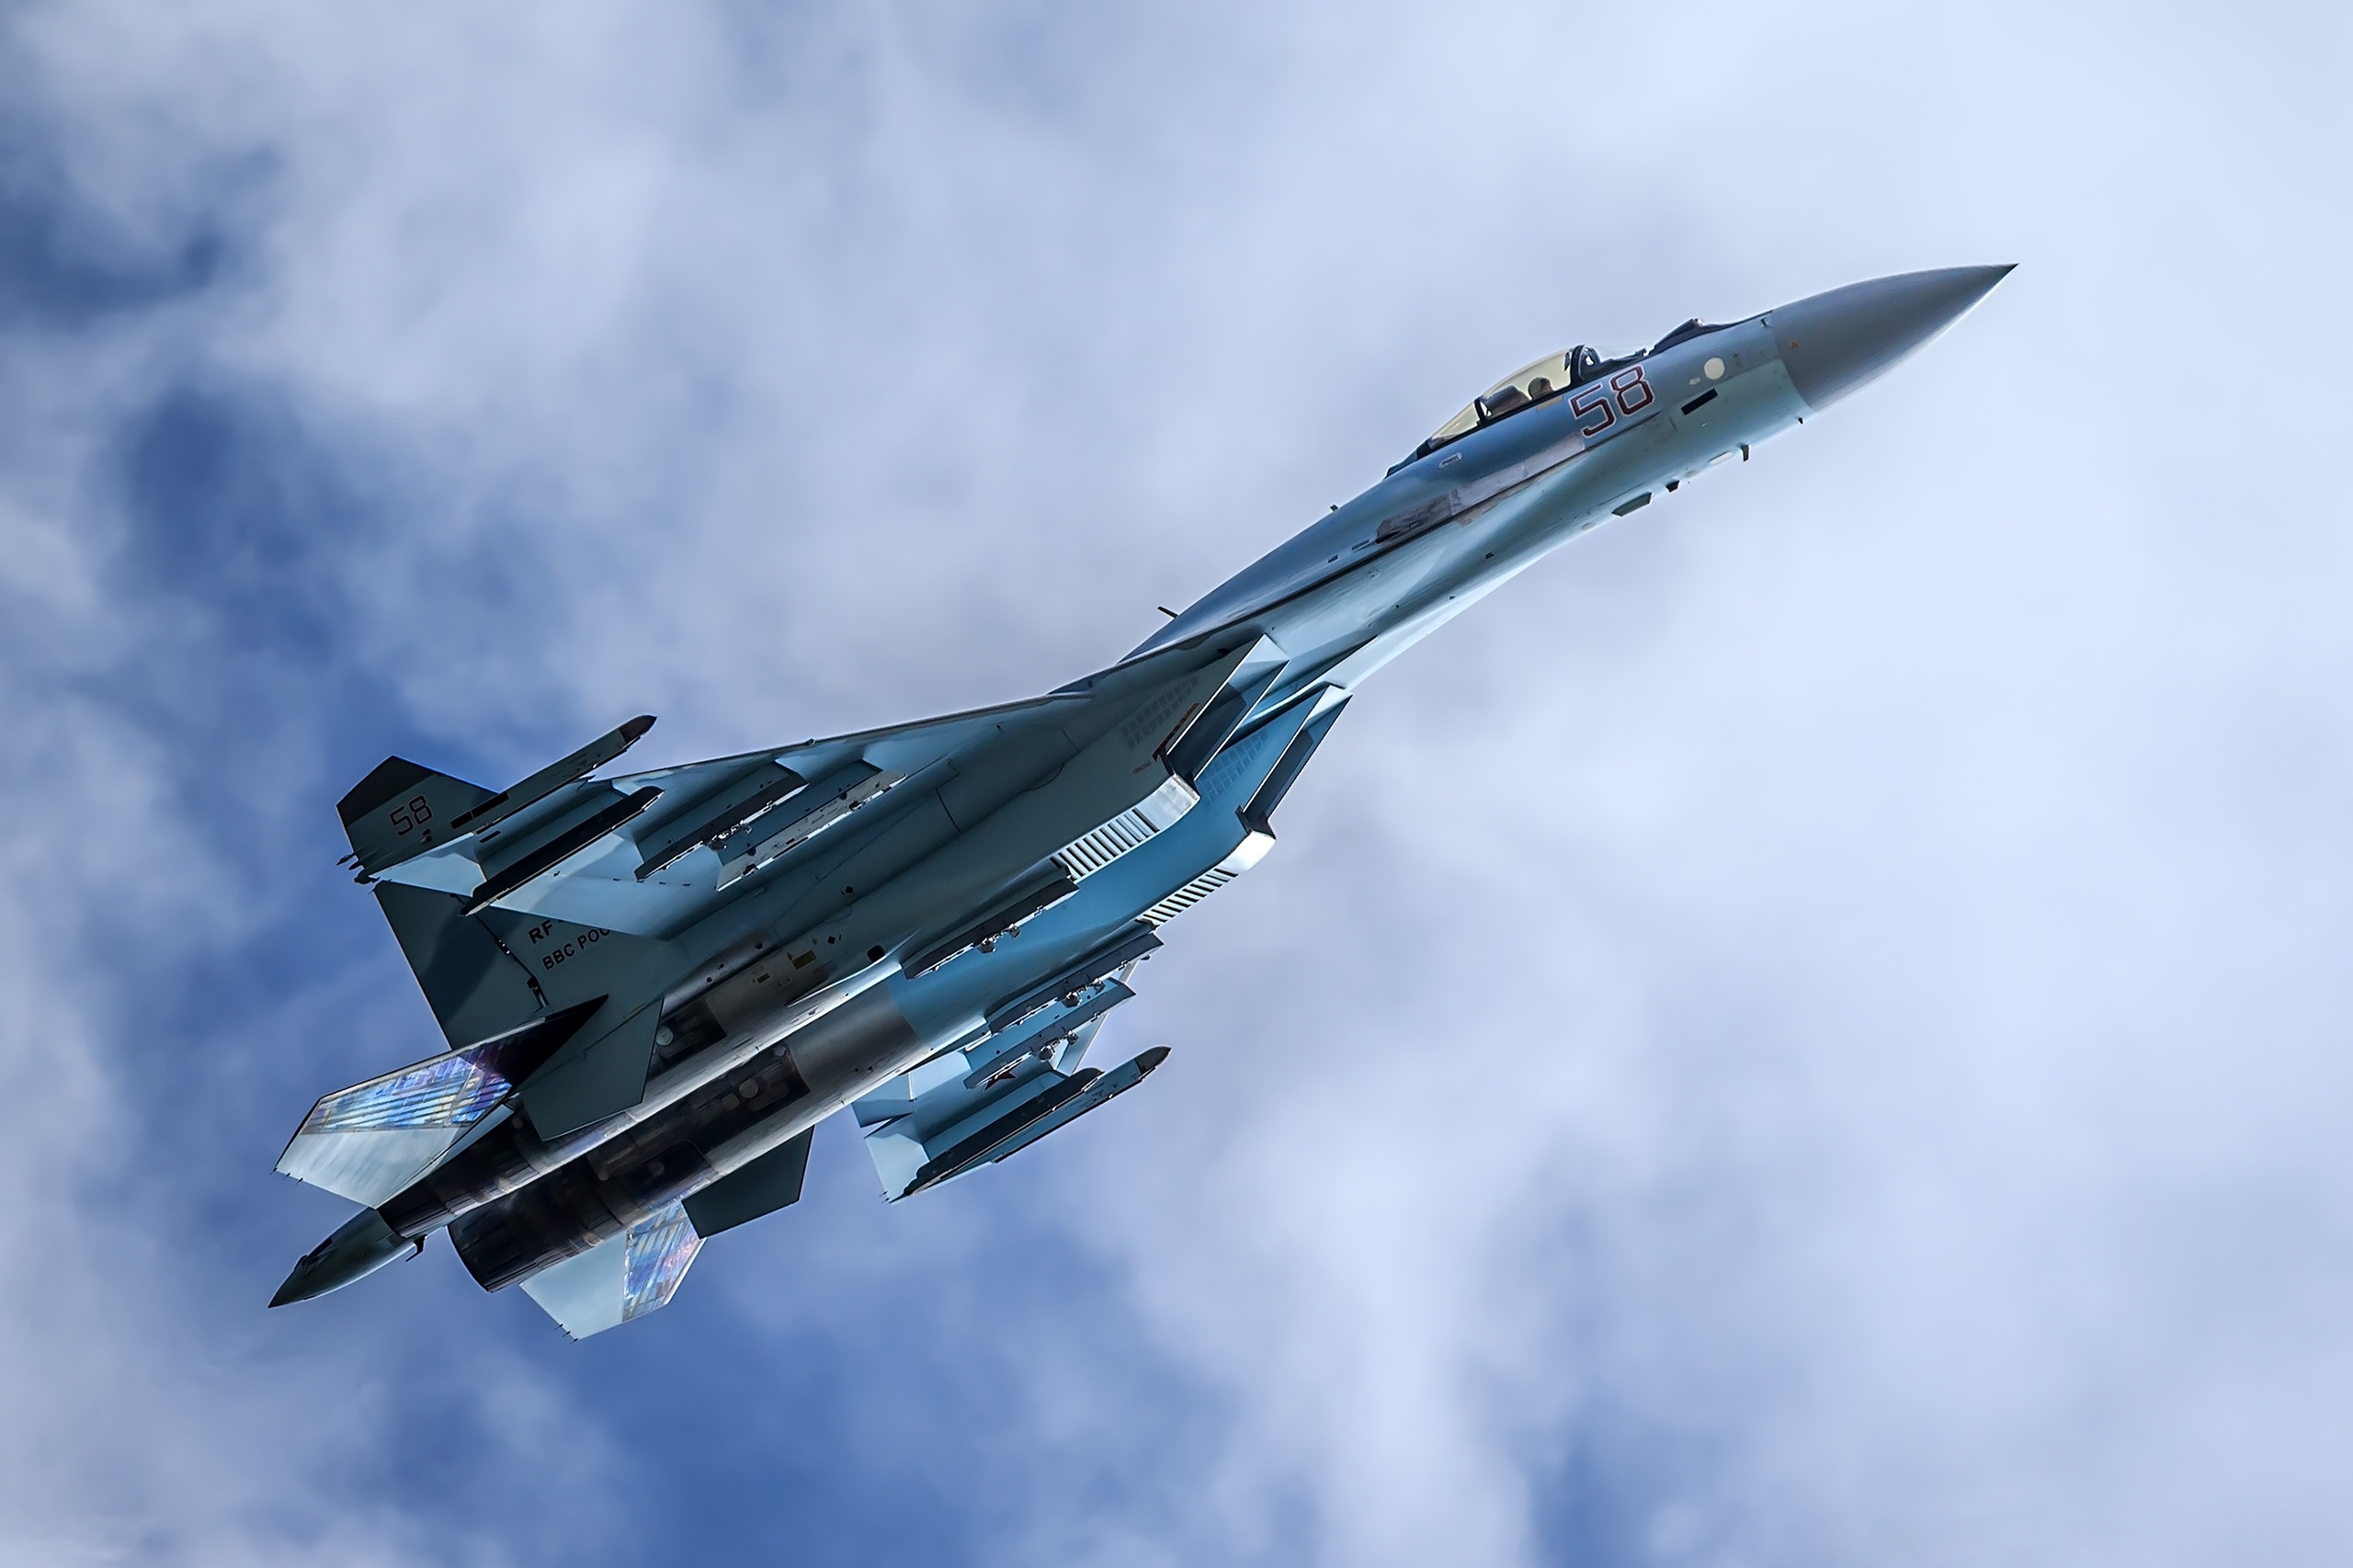 Sukhoi SU27 wallpapers HD  Download Free backgrounds